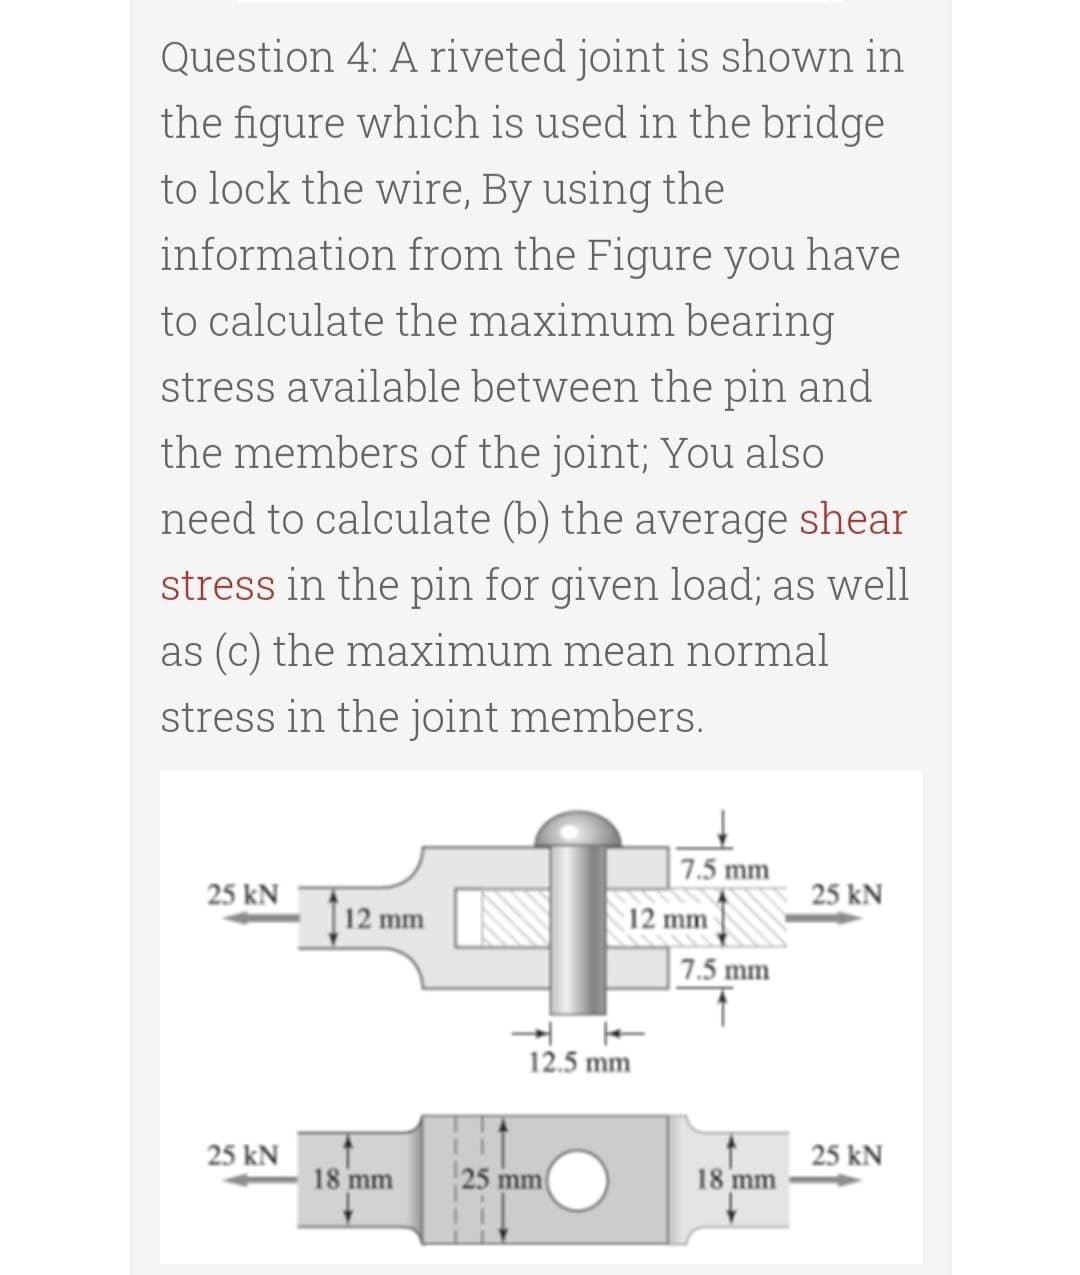 Question 4: A riveted joint is shown in
the figure which is used in the bridge
to lock the wire, By using the
information from the Figure you have
to calculate the maximum bearing
stress available between the pin and
the members of the joint; You also
need to calculate (b) the average shear
stress in the pin for given load; as well
as (c) the maximum mean normal
stress in the joint members.
7.5 mm
25 kN
25 kN
12 mm
12 mm
7.5 mm
12.5 mm
25 kN
25 kN
18 mm
25 mm
18 mm
